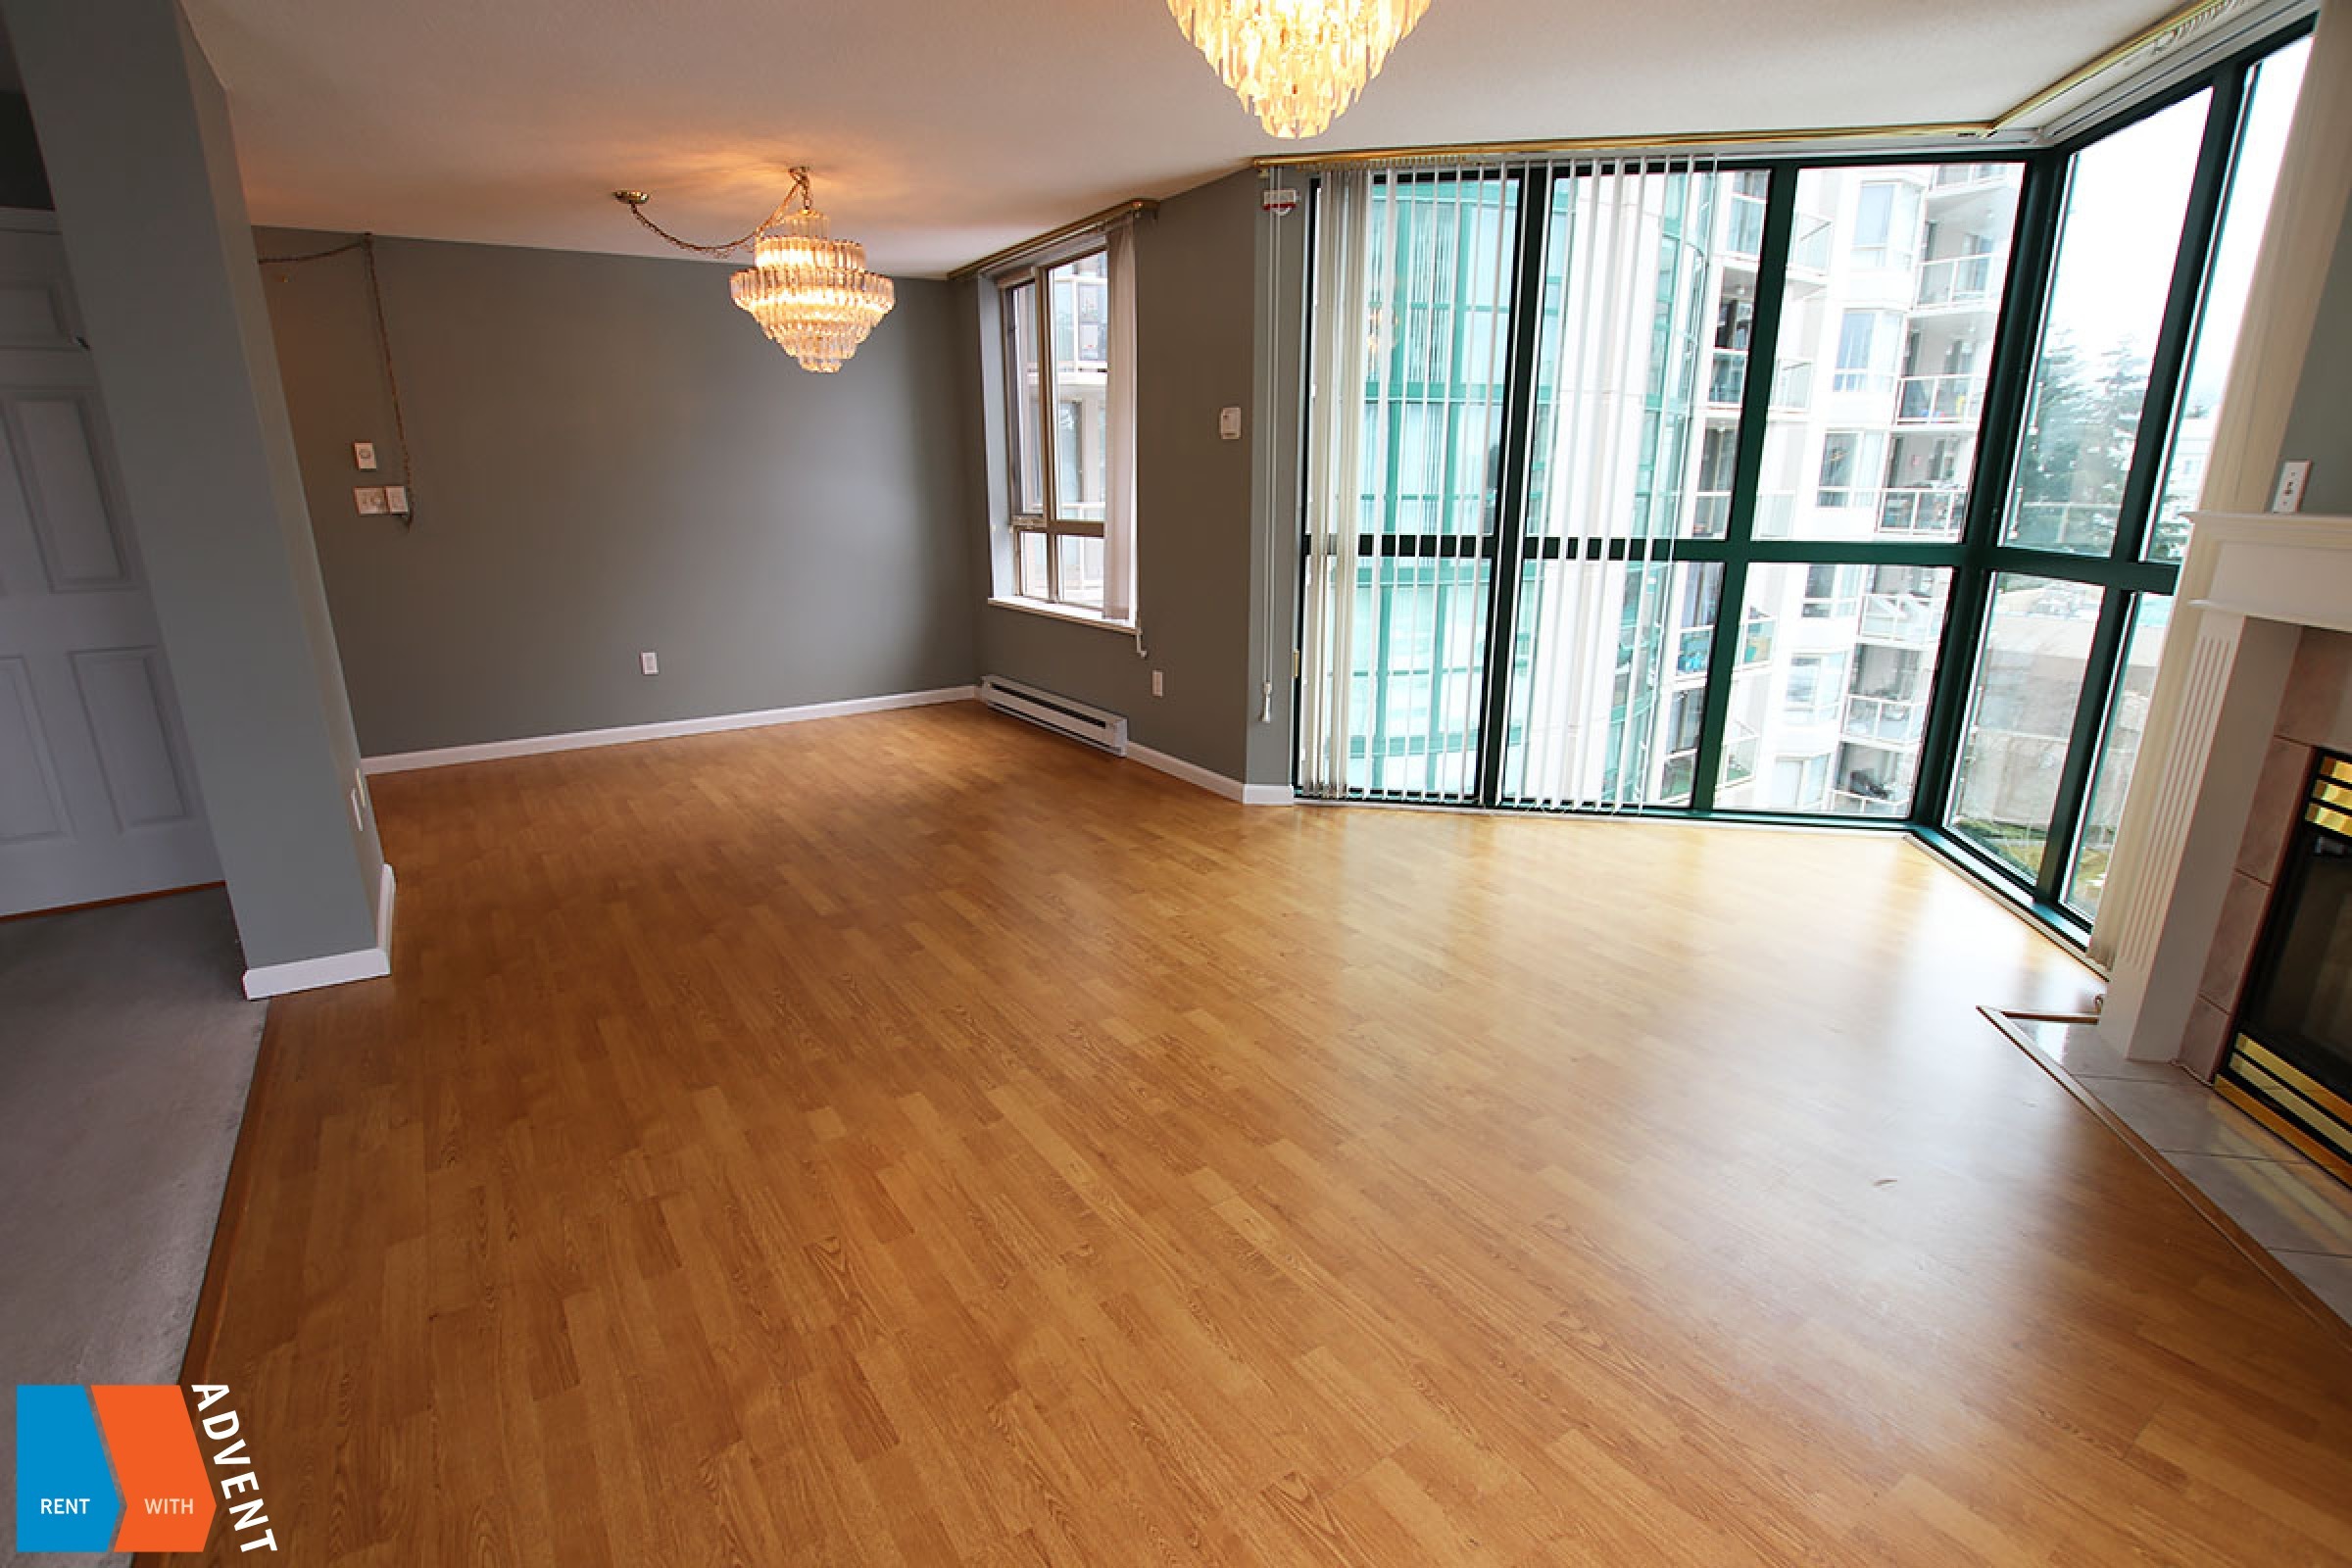 Spacious 5th Floor Unfurnished 2 Bedroom Apartment Rental at The Selkirk in Coquitlam Centre. 506 - 1199 Eastwood Street, Coquitlam, BC, Canada.